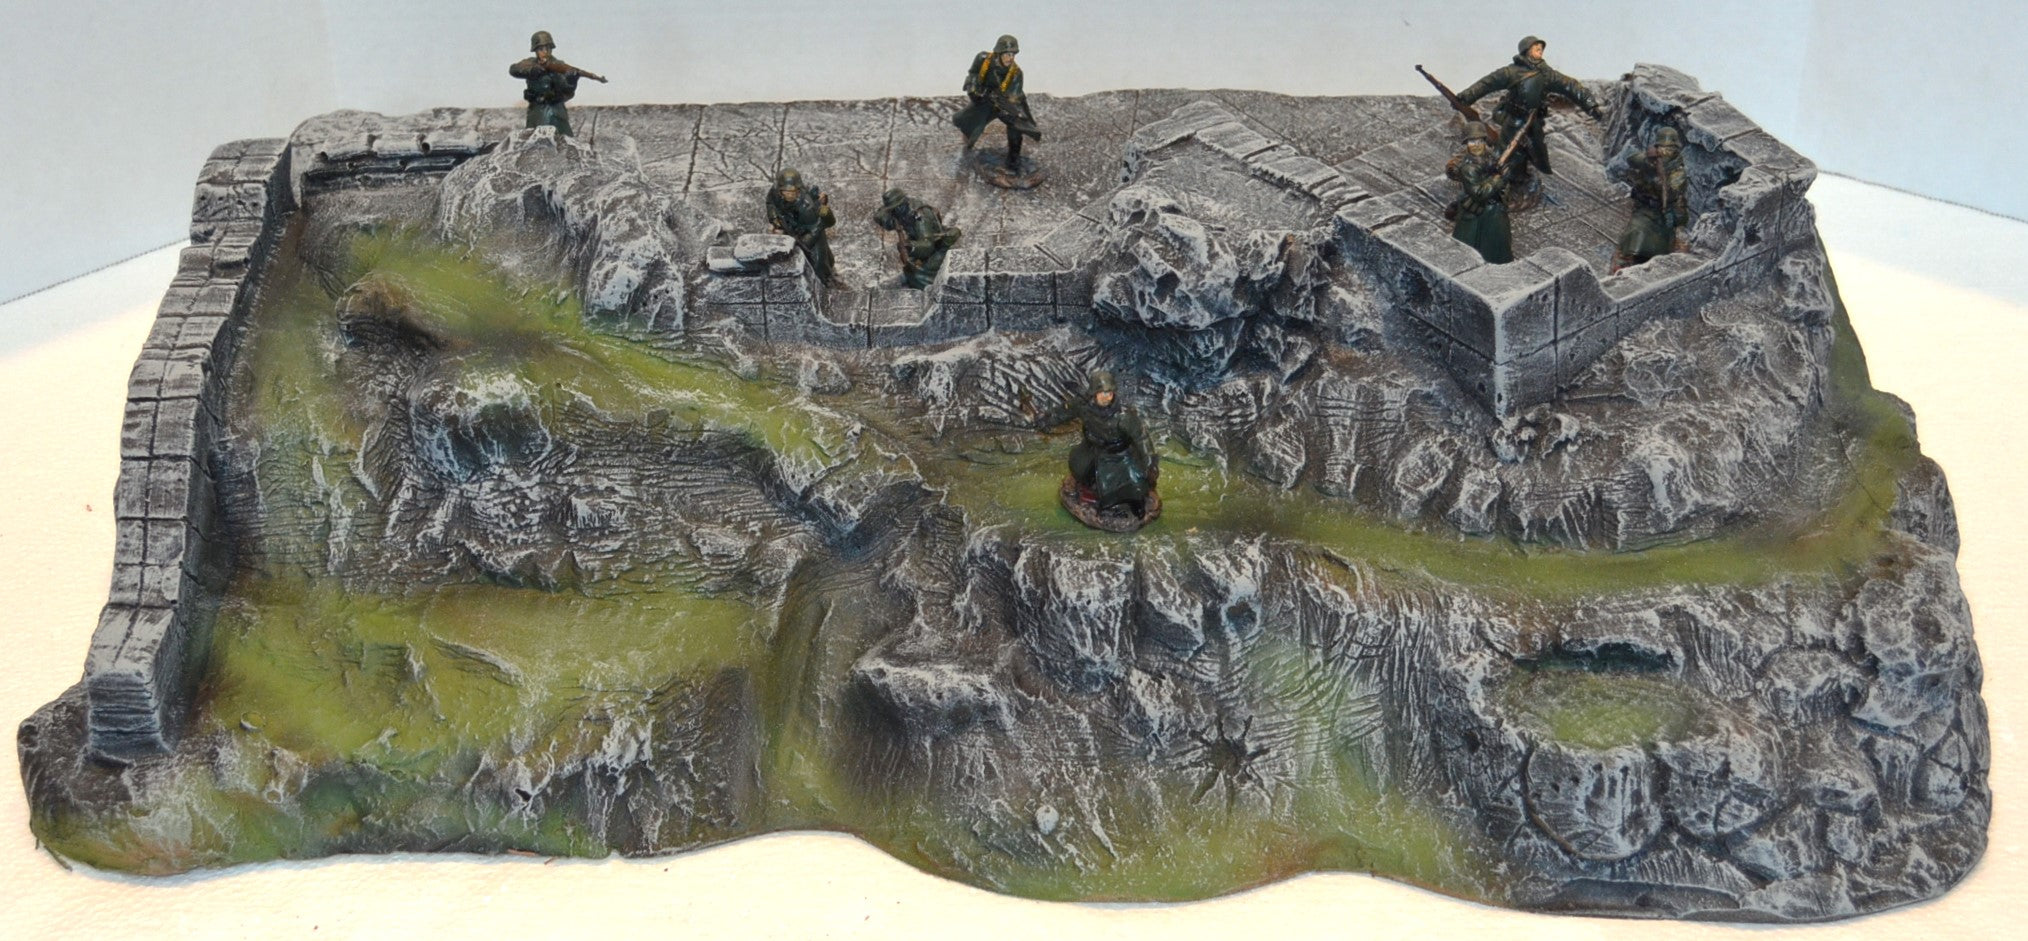 ATHERTON SCENICS PAINTED D-DAY ATLANTIC WALL DEFENSIVE POSITION - FT9951